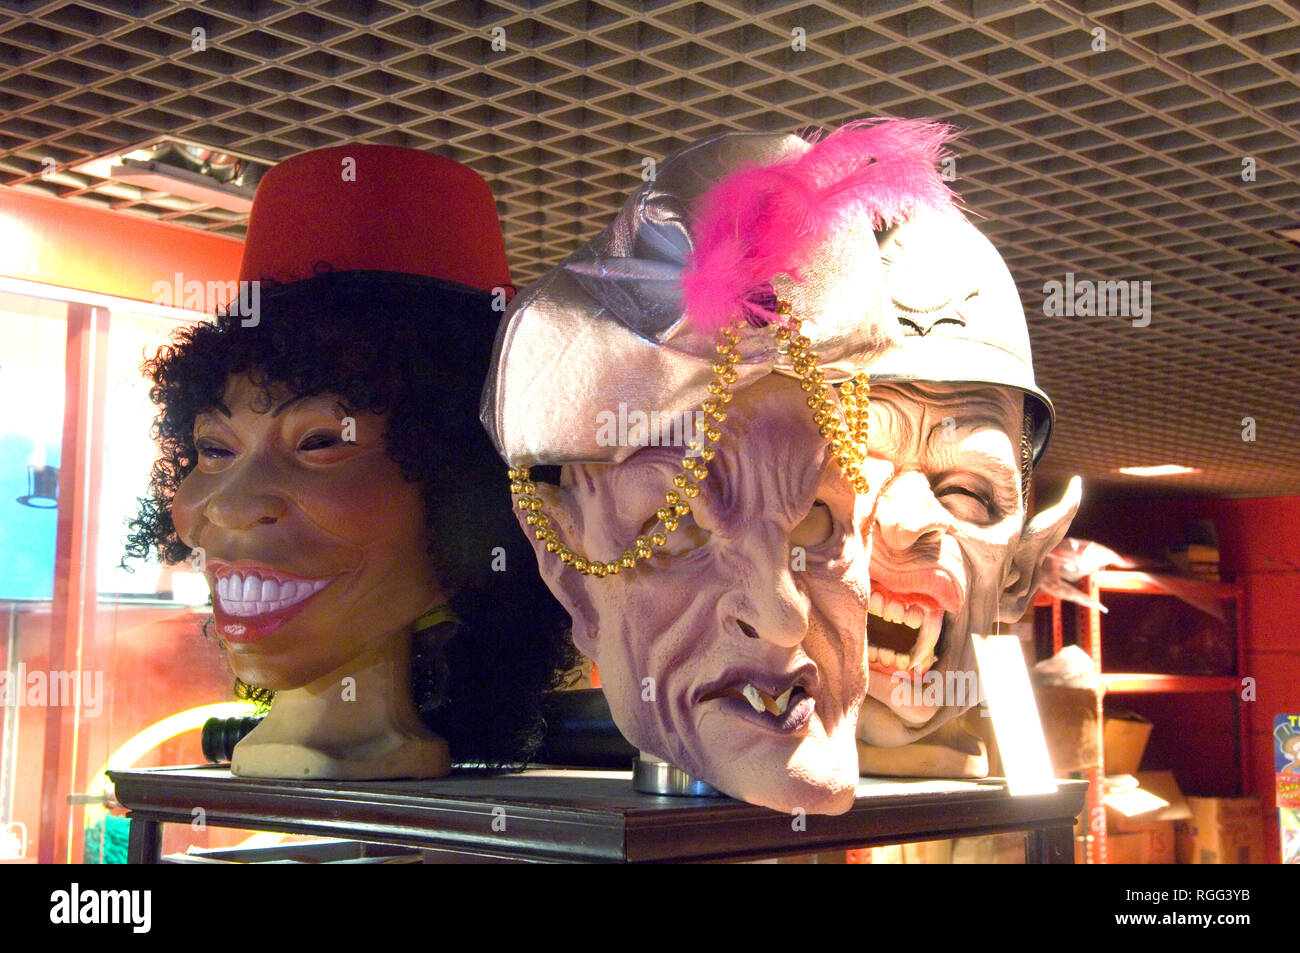 Three grotesque rubber face masks for sale in a magic shop Stock Photo